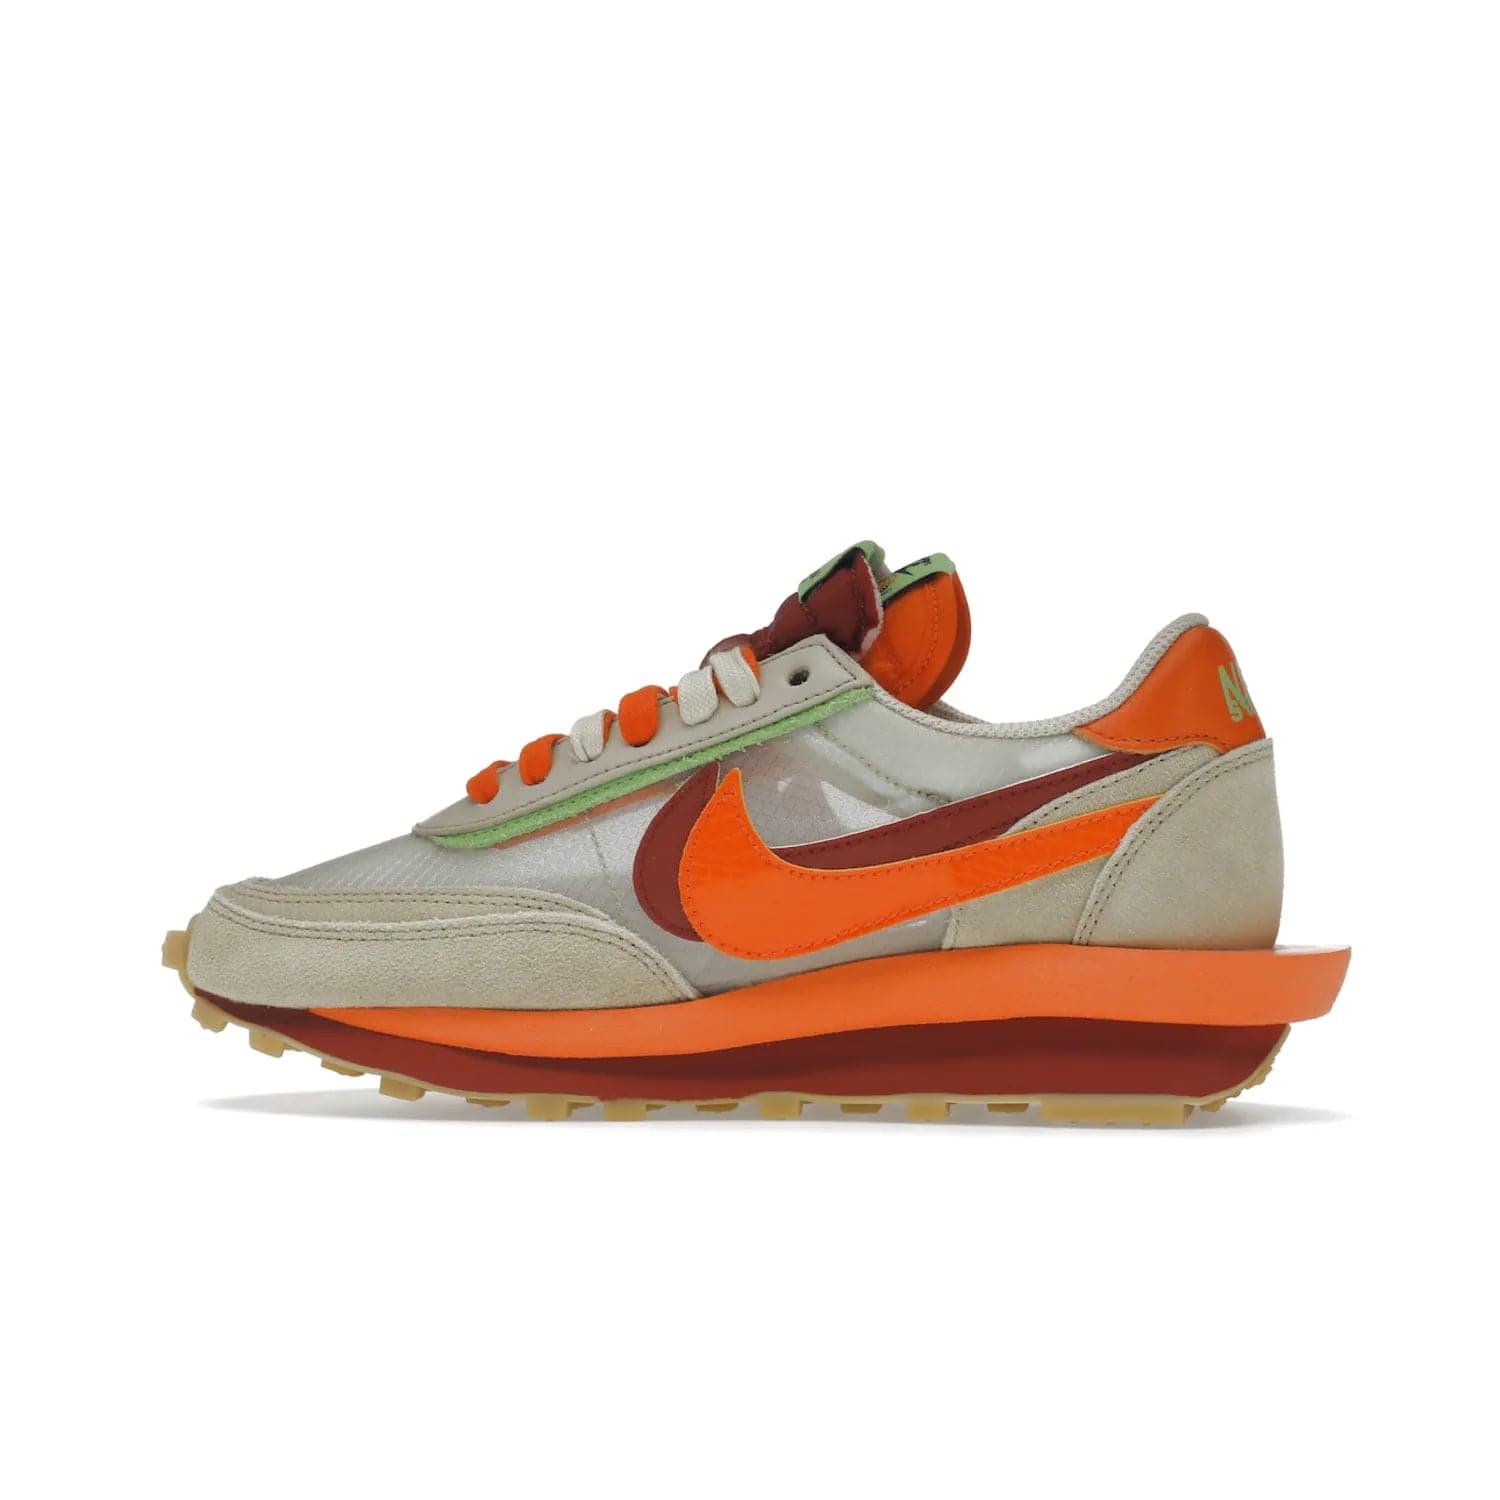 Nike LD Waffle sacai CLOT Kiss of Death Net Orange Blaze - Image 20 - Only at www.BallersClubKickz.com - A bold and stylish Nike LD Waffle sacai CLOT Kiss of Death Net Orange Blaze sneaker featuring a unique off-white, Deep Red & Orange Blaze Swooshes, two-toned stacked sole and doubled tongue. Available in September 2021. Make a statement.